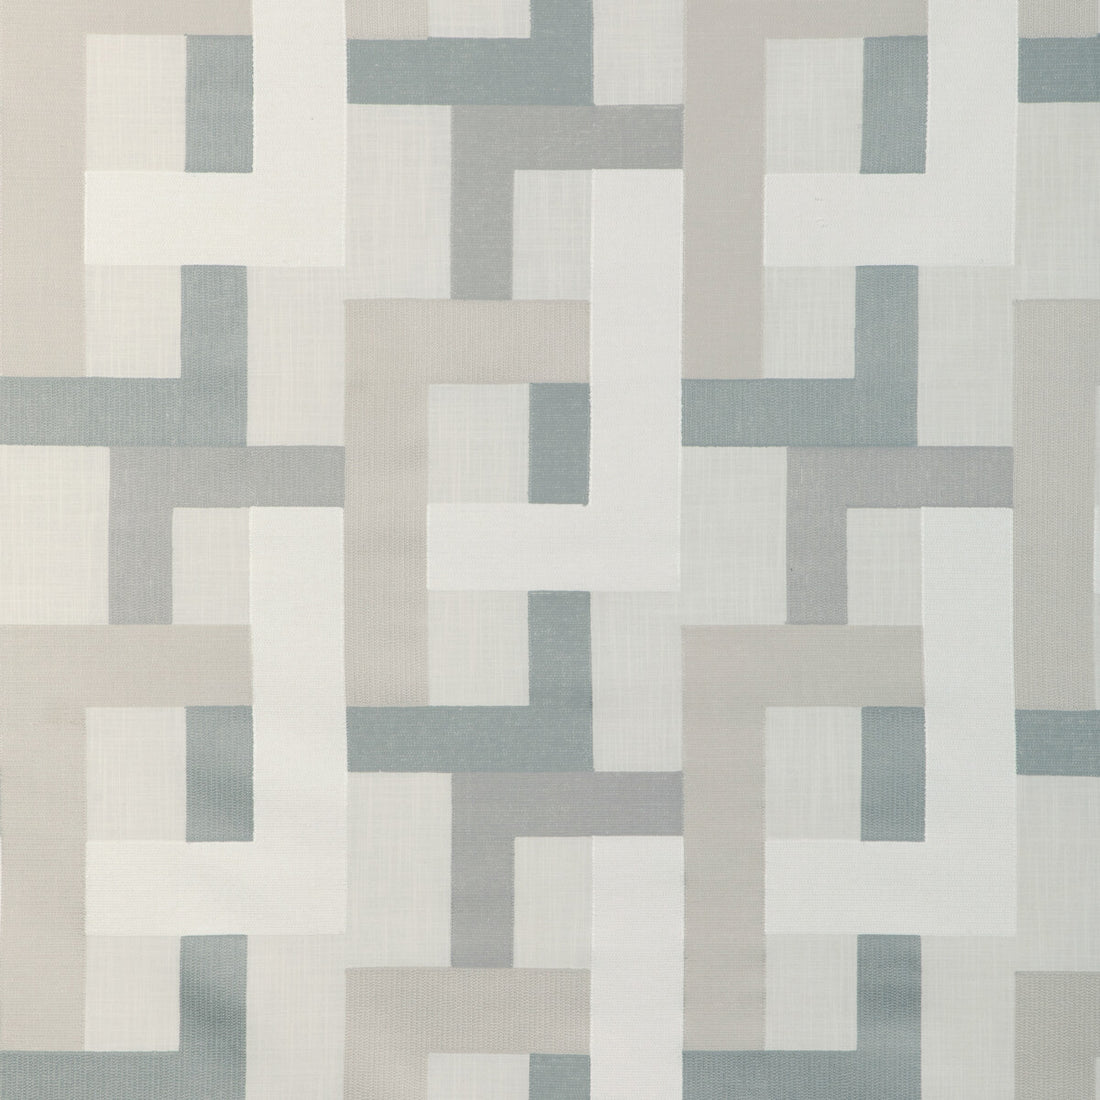 Farnsworth fabric in oyster color - pattern 90009.11.0 - by Kravet Basics in the Mid-Century Modern collection